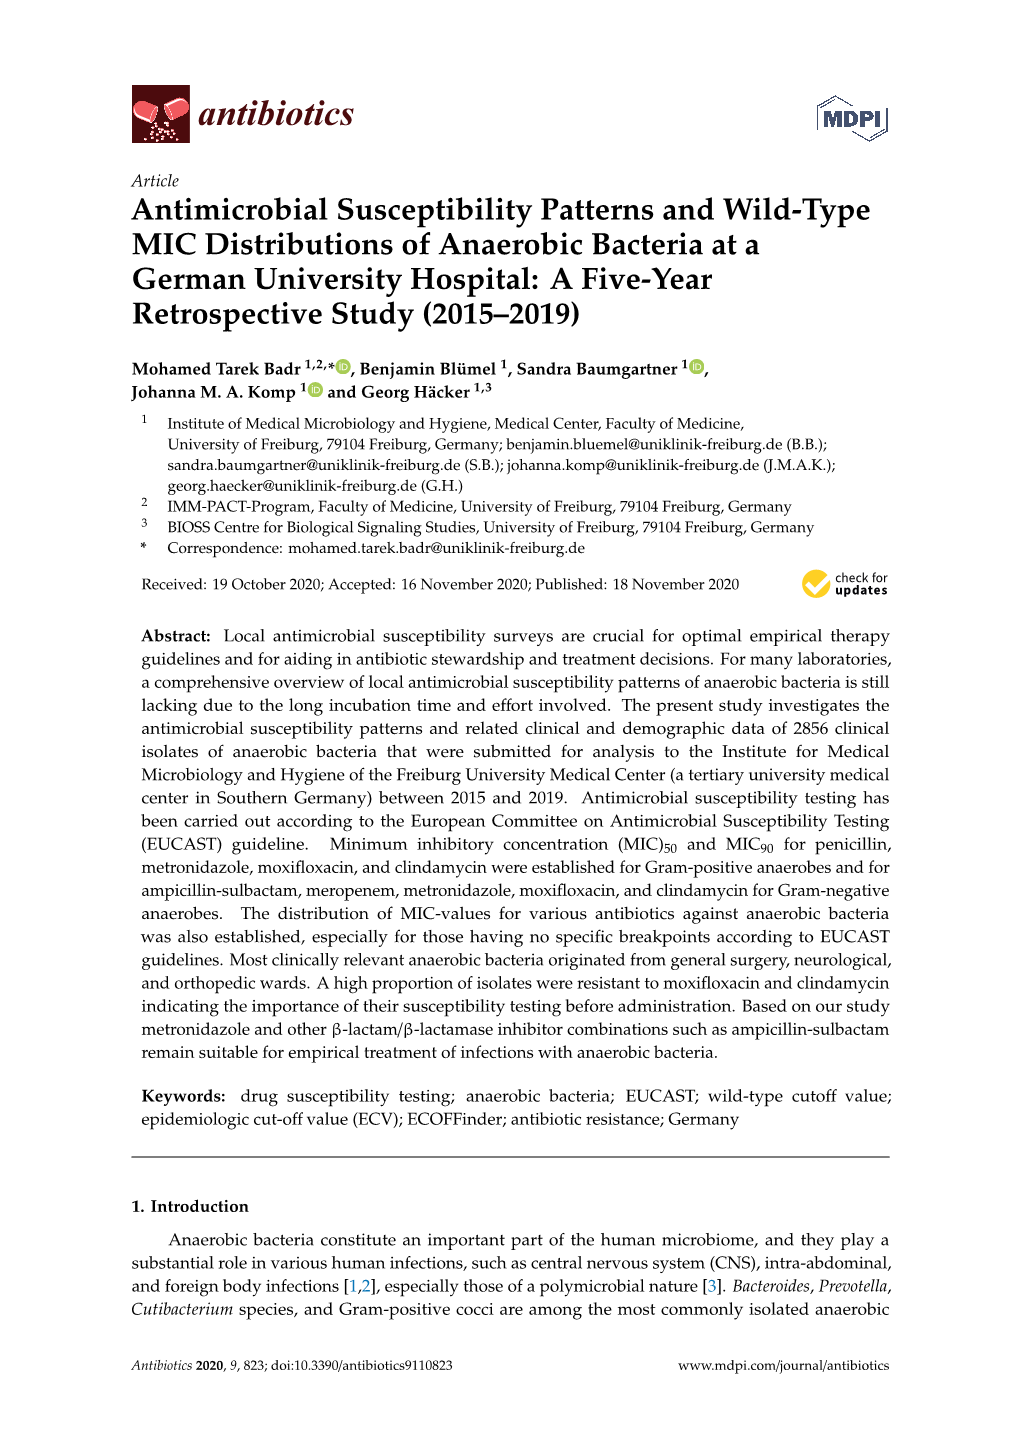 Antimicrobial Susceptibility Patterns and Wild-Type MIC